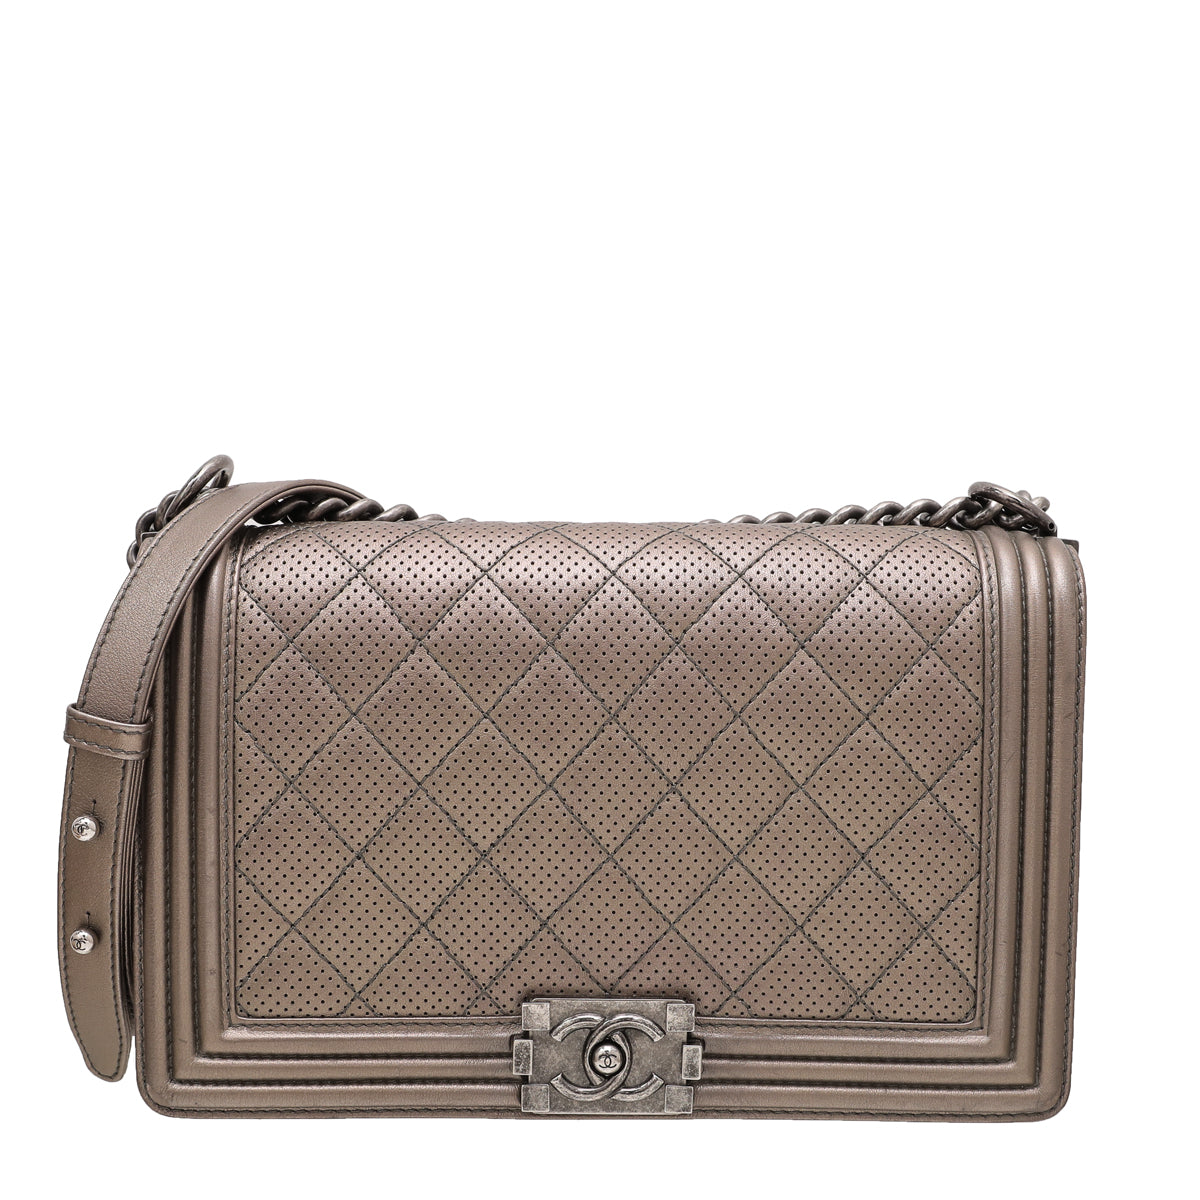 Chanel Bronze Gold Perforated Le Boy New Medium Bag